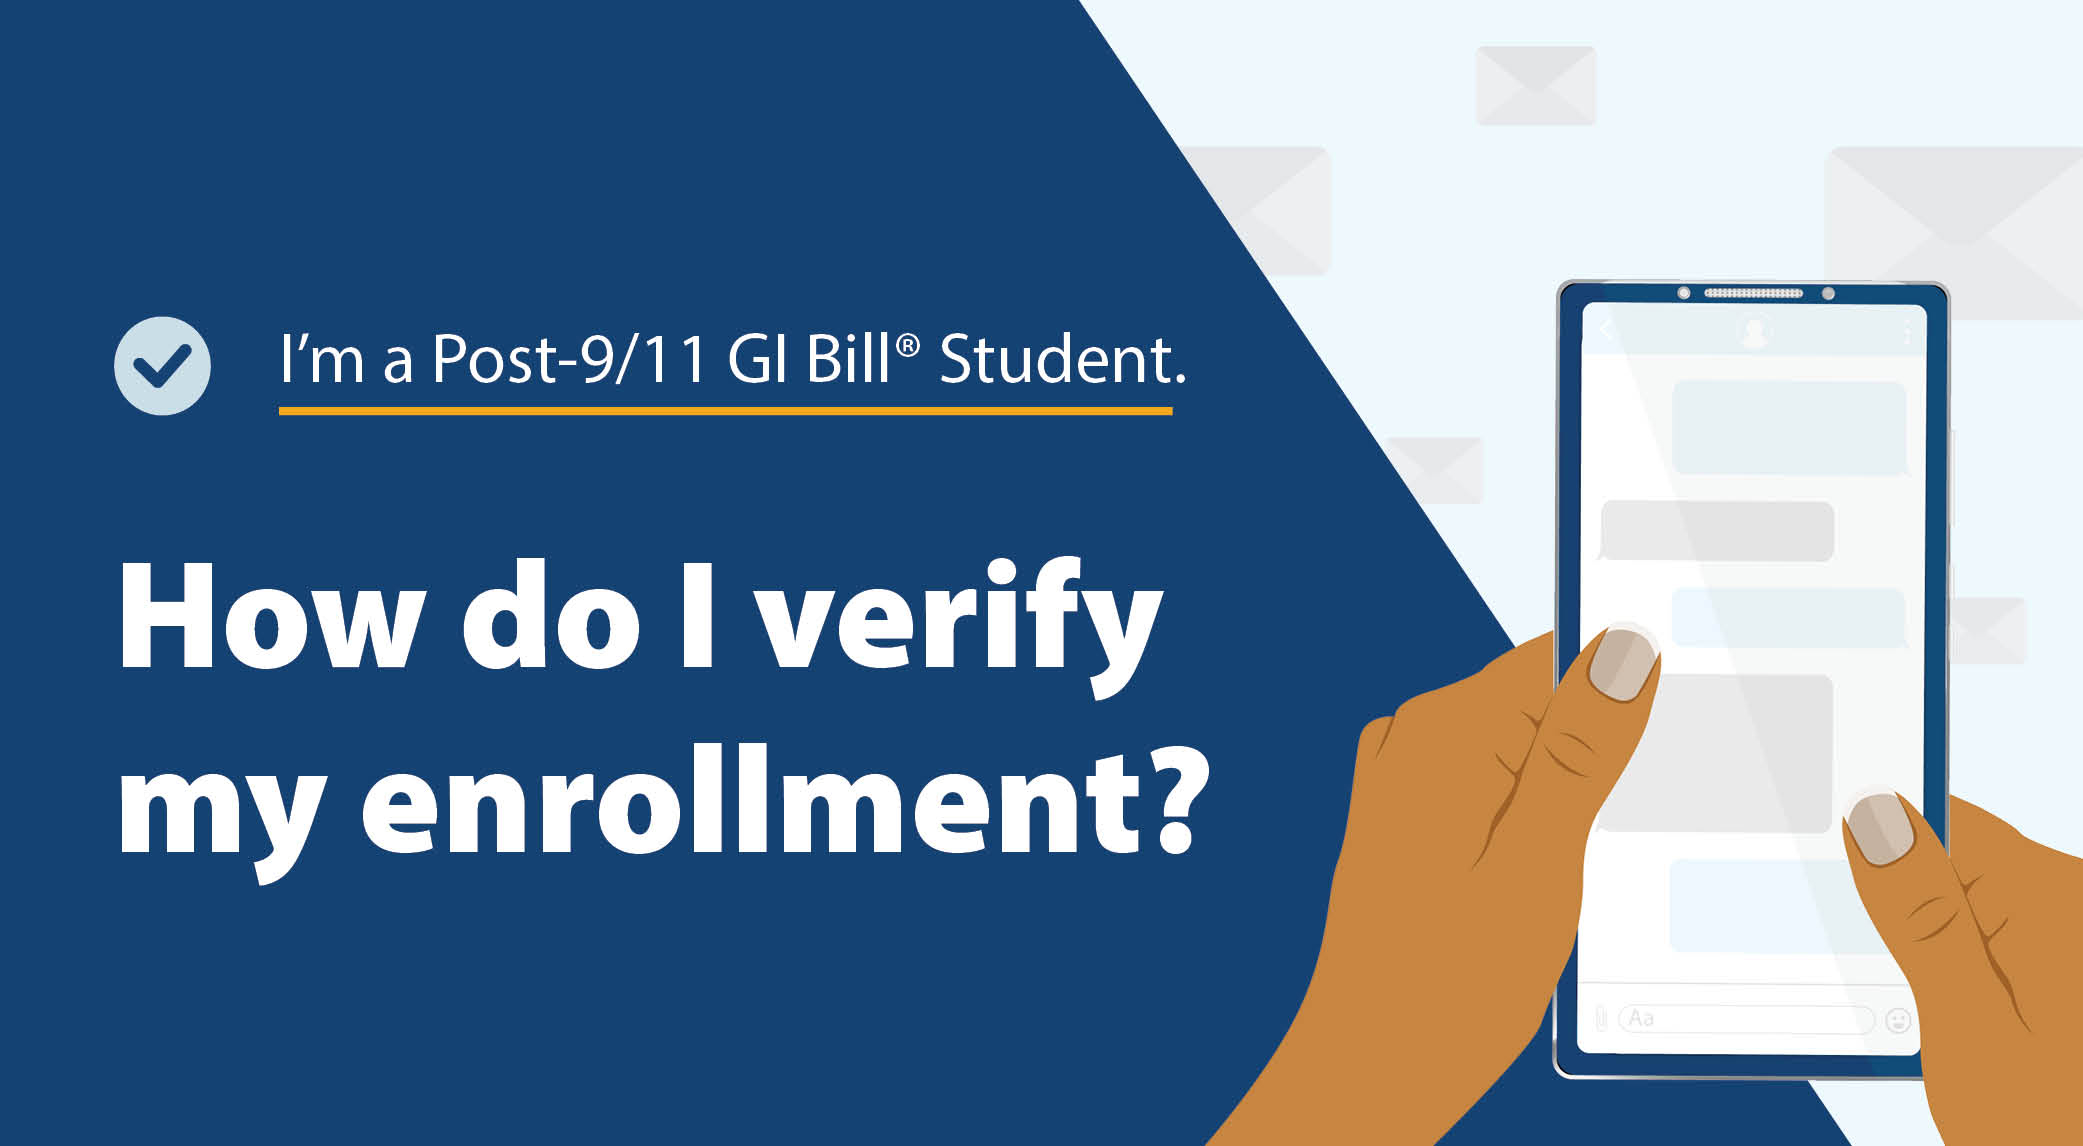 I'm a Post-9/11 GI Bill Student.  How do I verify my enrollment? with image of hands holding a phone